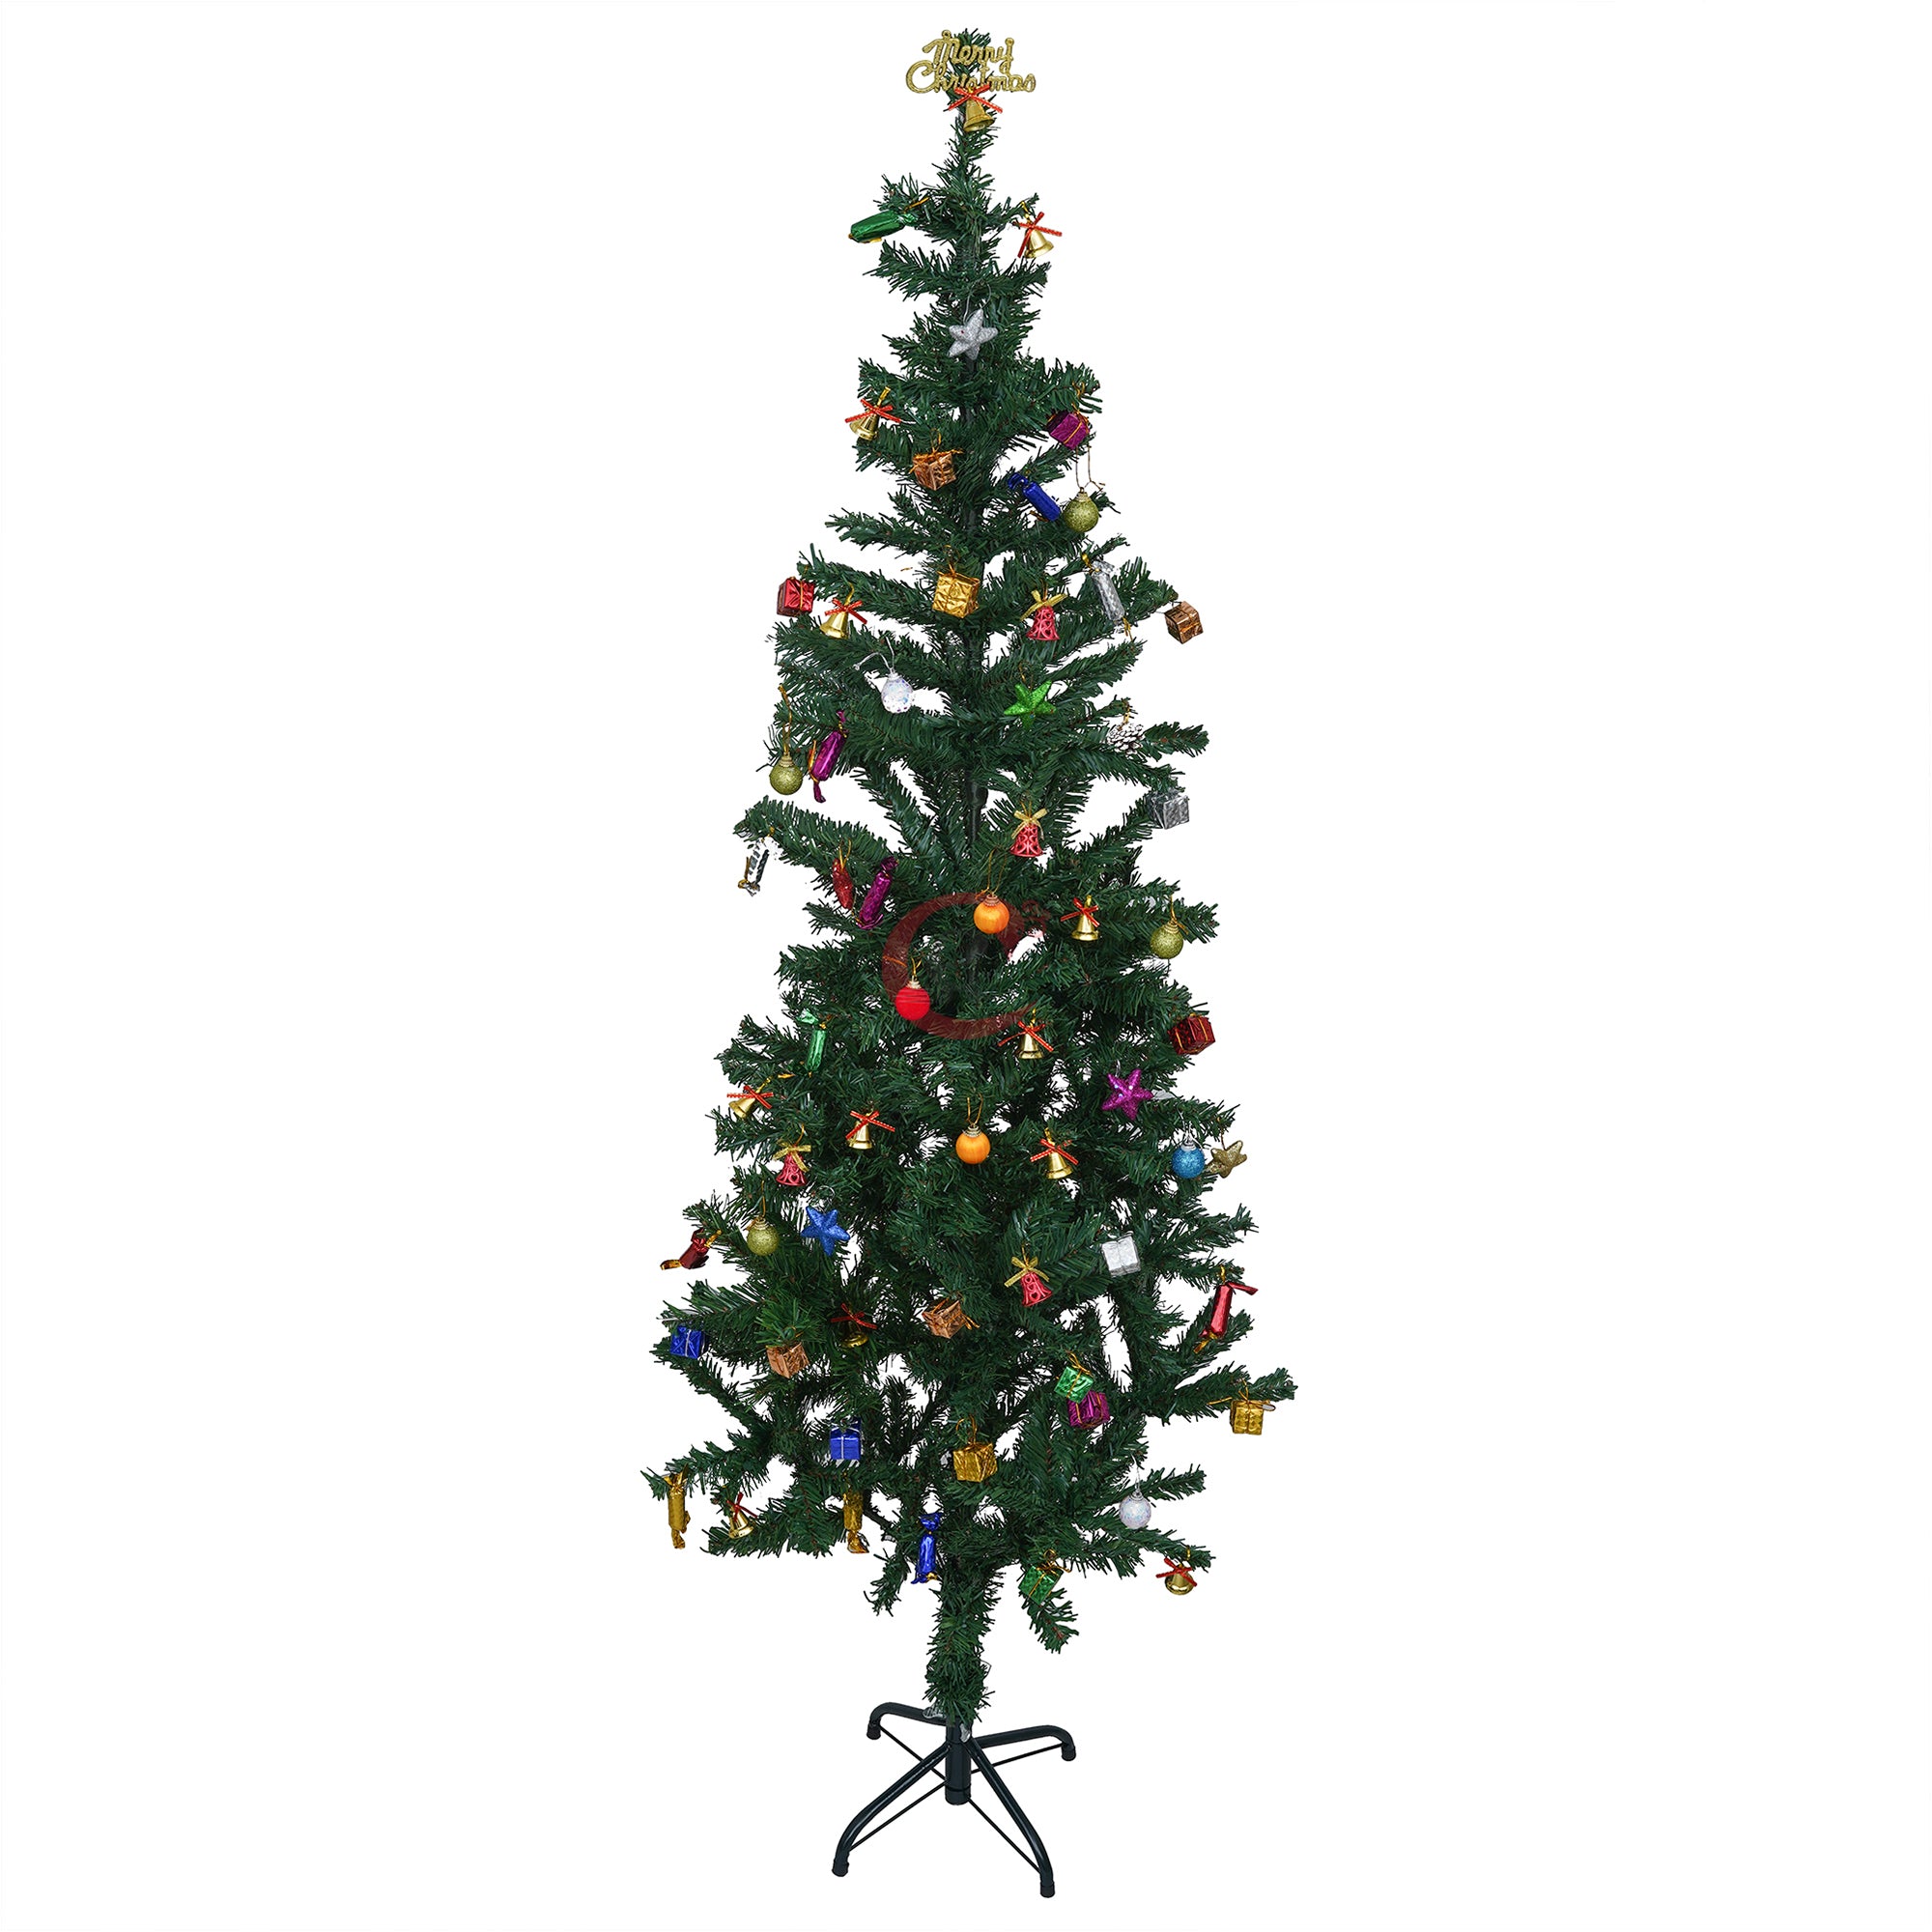 eCraftIndia 5 Feet Green Artificial Christmas Tree Xmas Pine Tree with Stand and 100 Christmas Decoration Ornaments Props - Merry Christmas Decoration Item for Home, Office, and Church 6